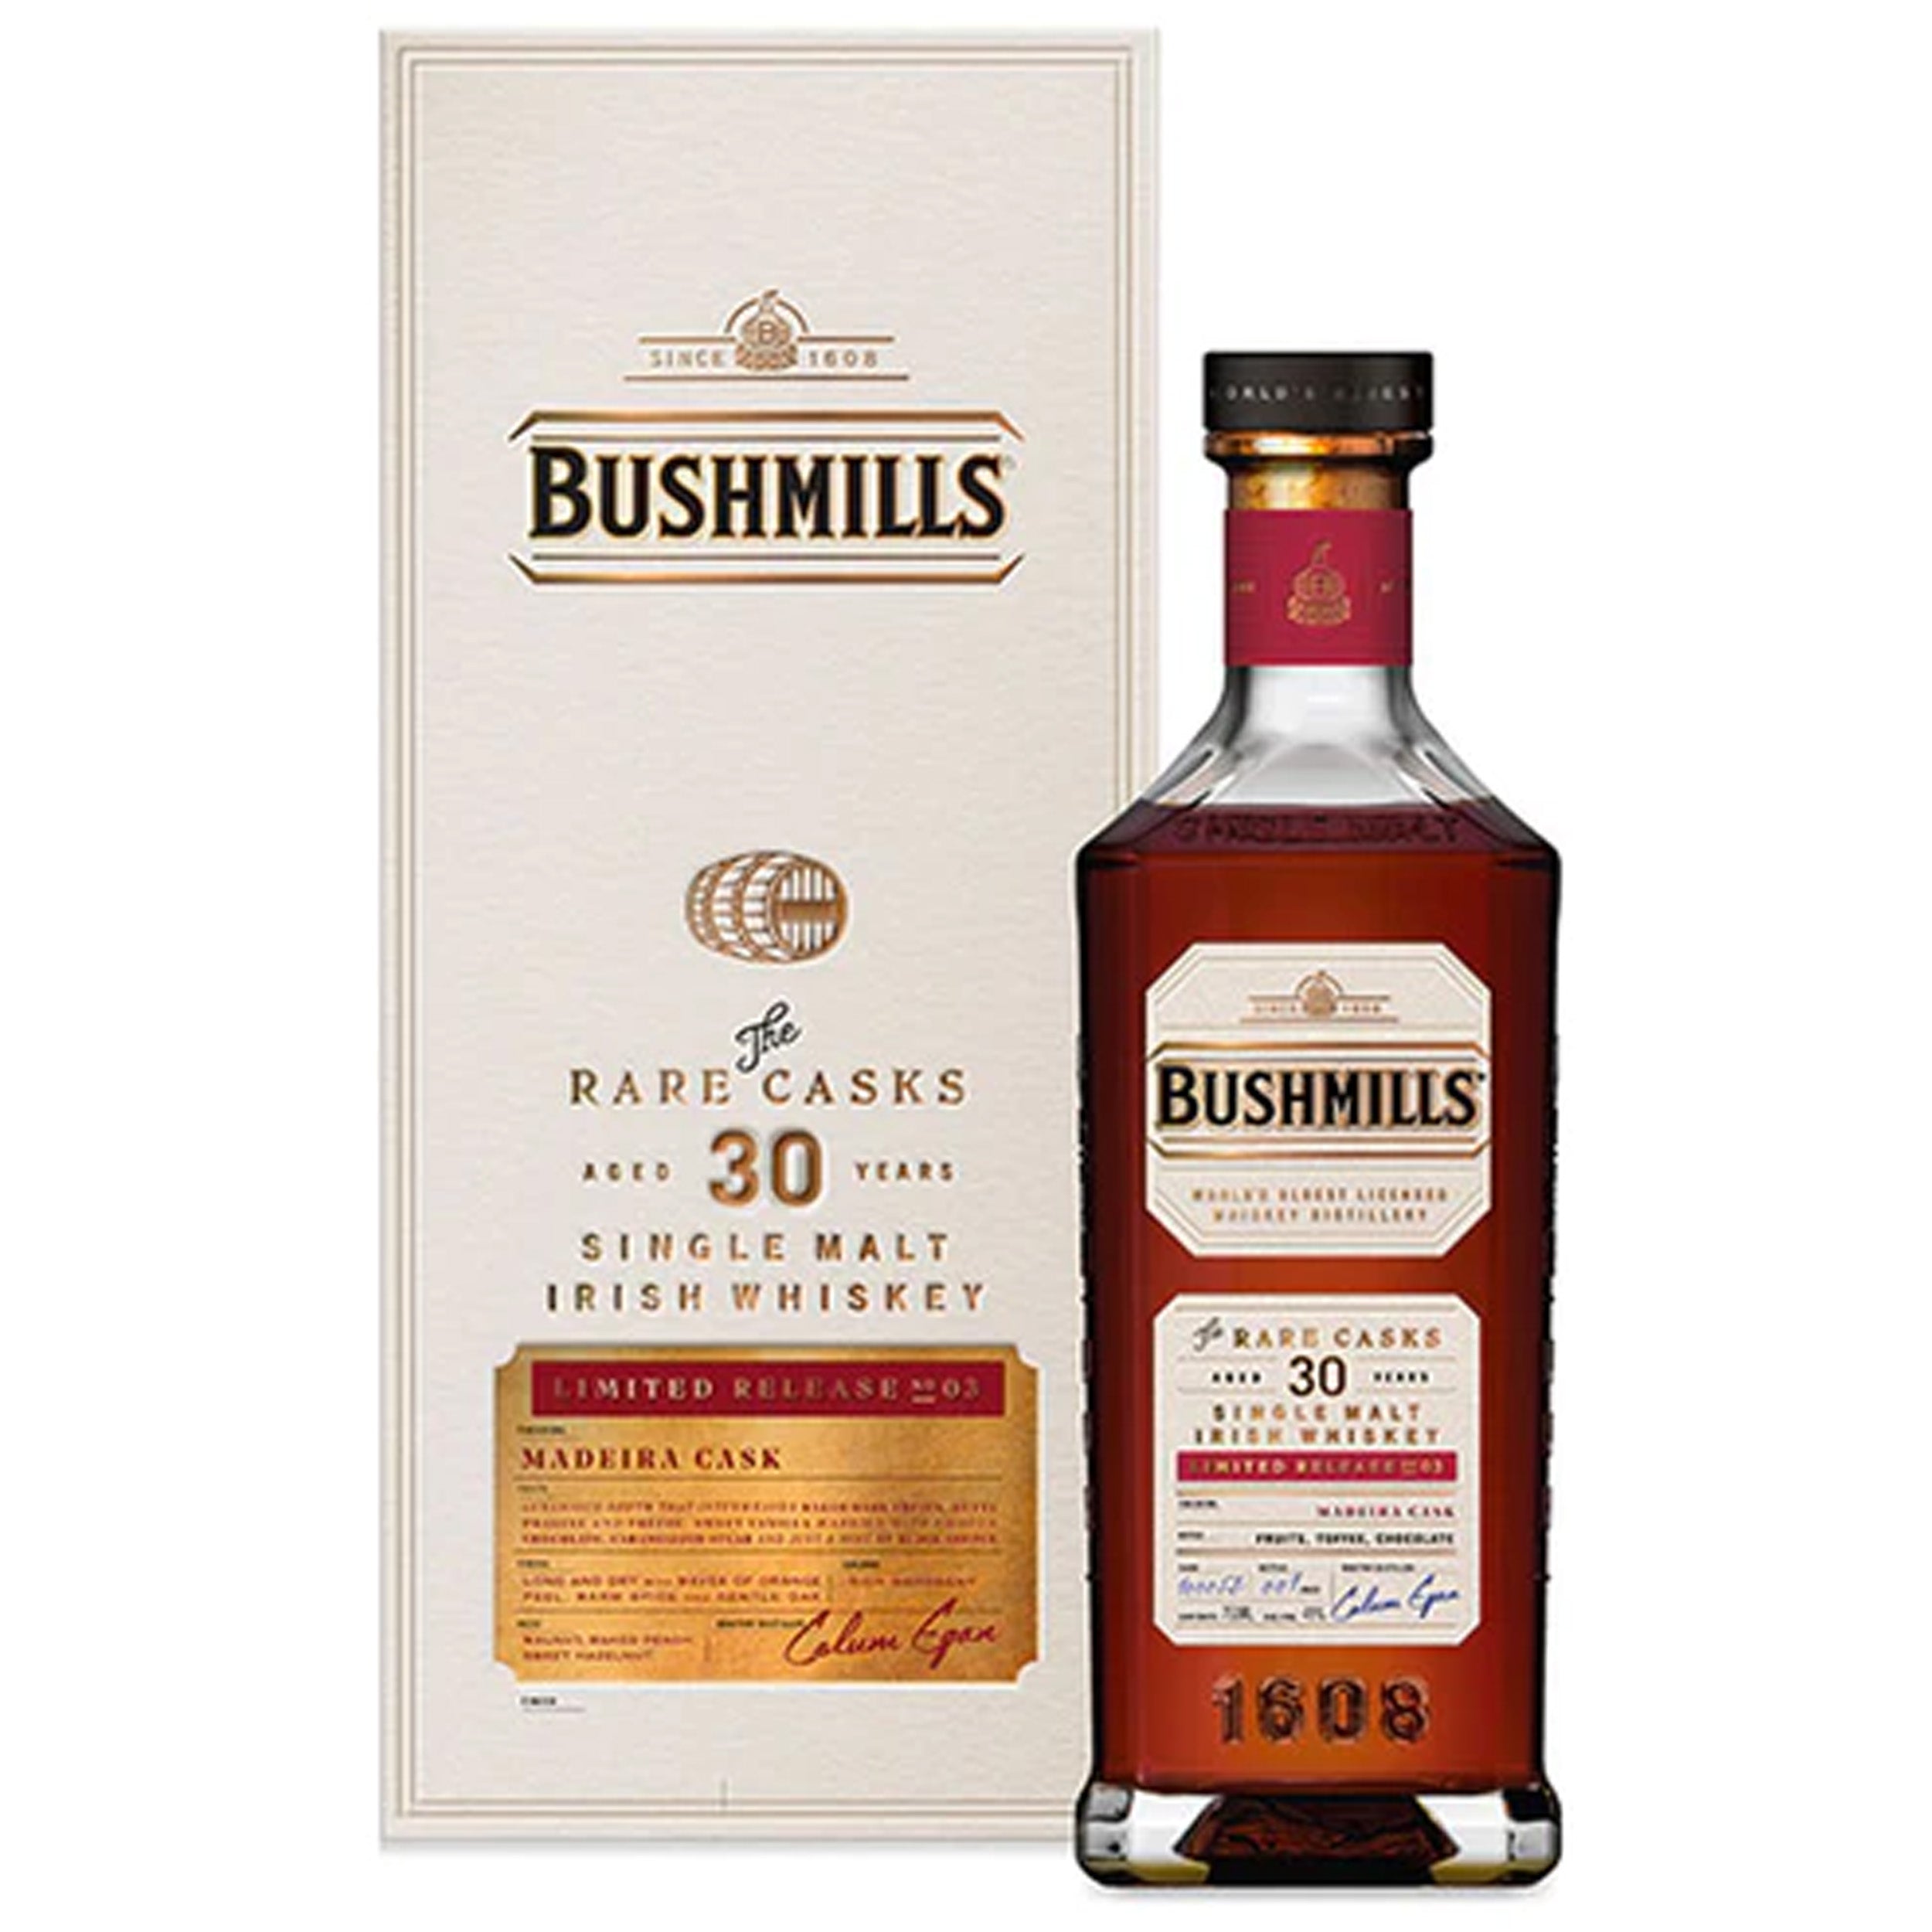 Bushmills The Rare Casks 30 Year Madeira Cask Finish Irish Whiskey Limited Release No. 3